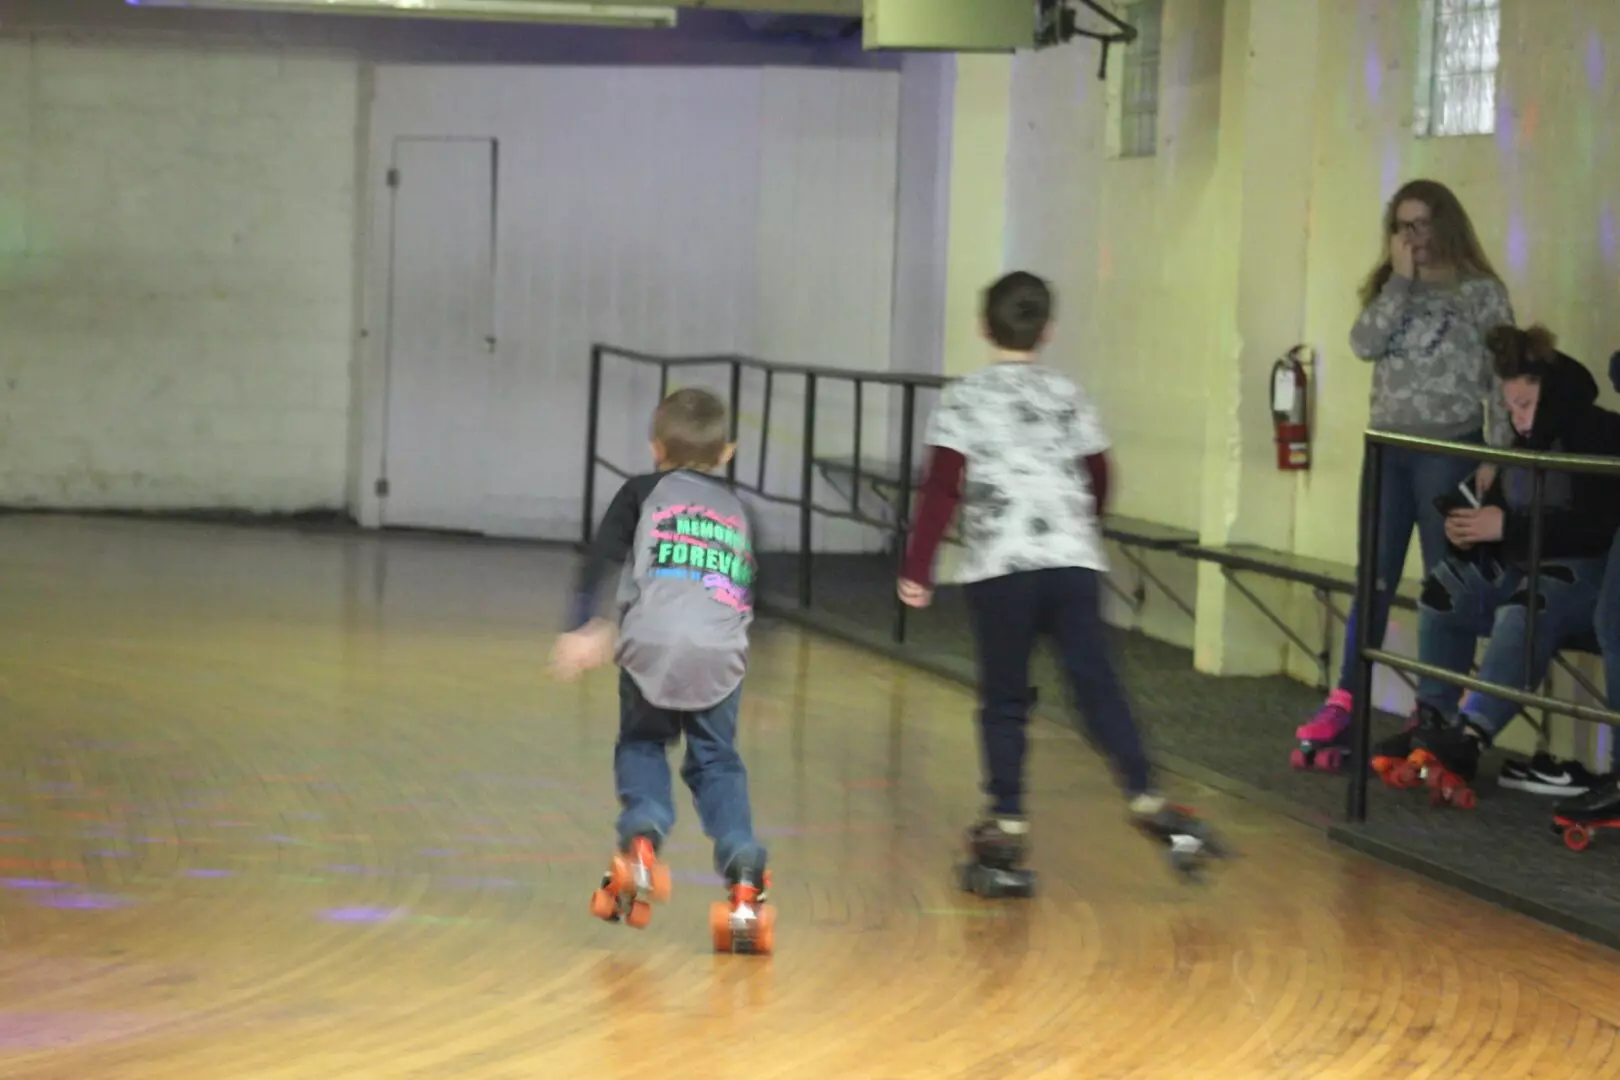 Two little boys racing on the roller rink